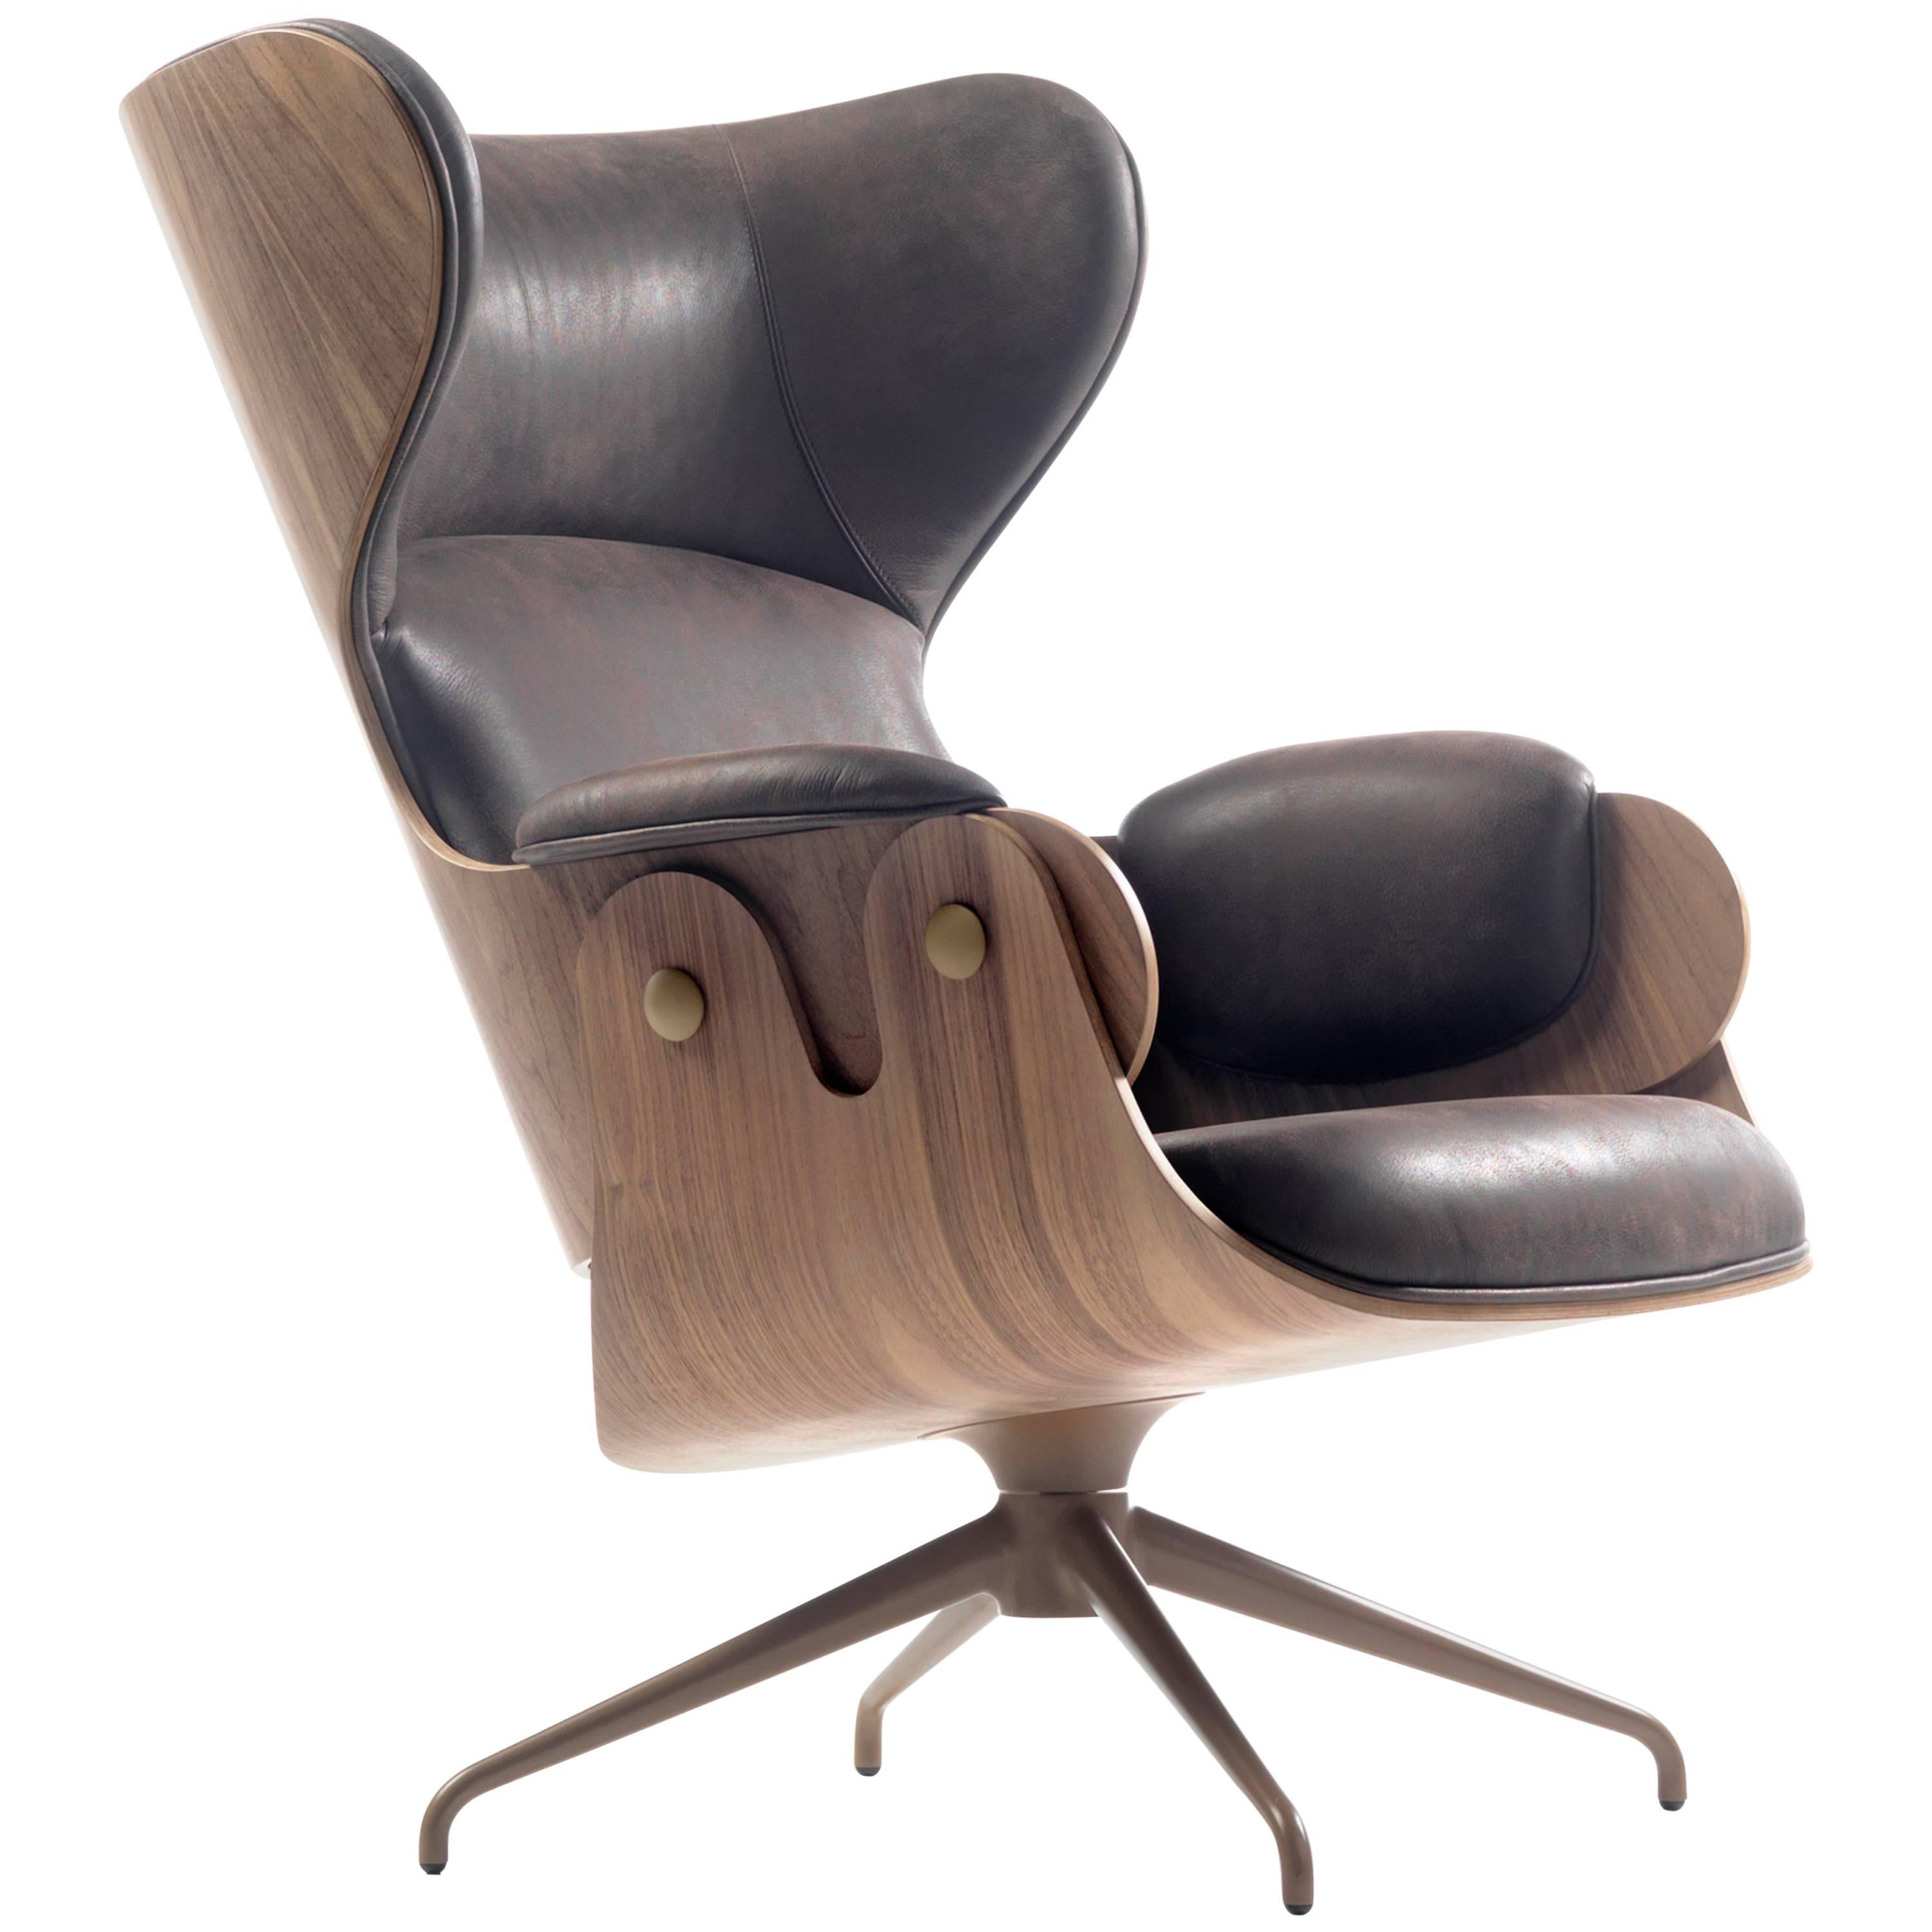 Contemporary lounge chair, "Lounger" by Jaime Hayon, walnut, vintage leather